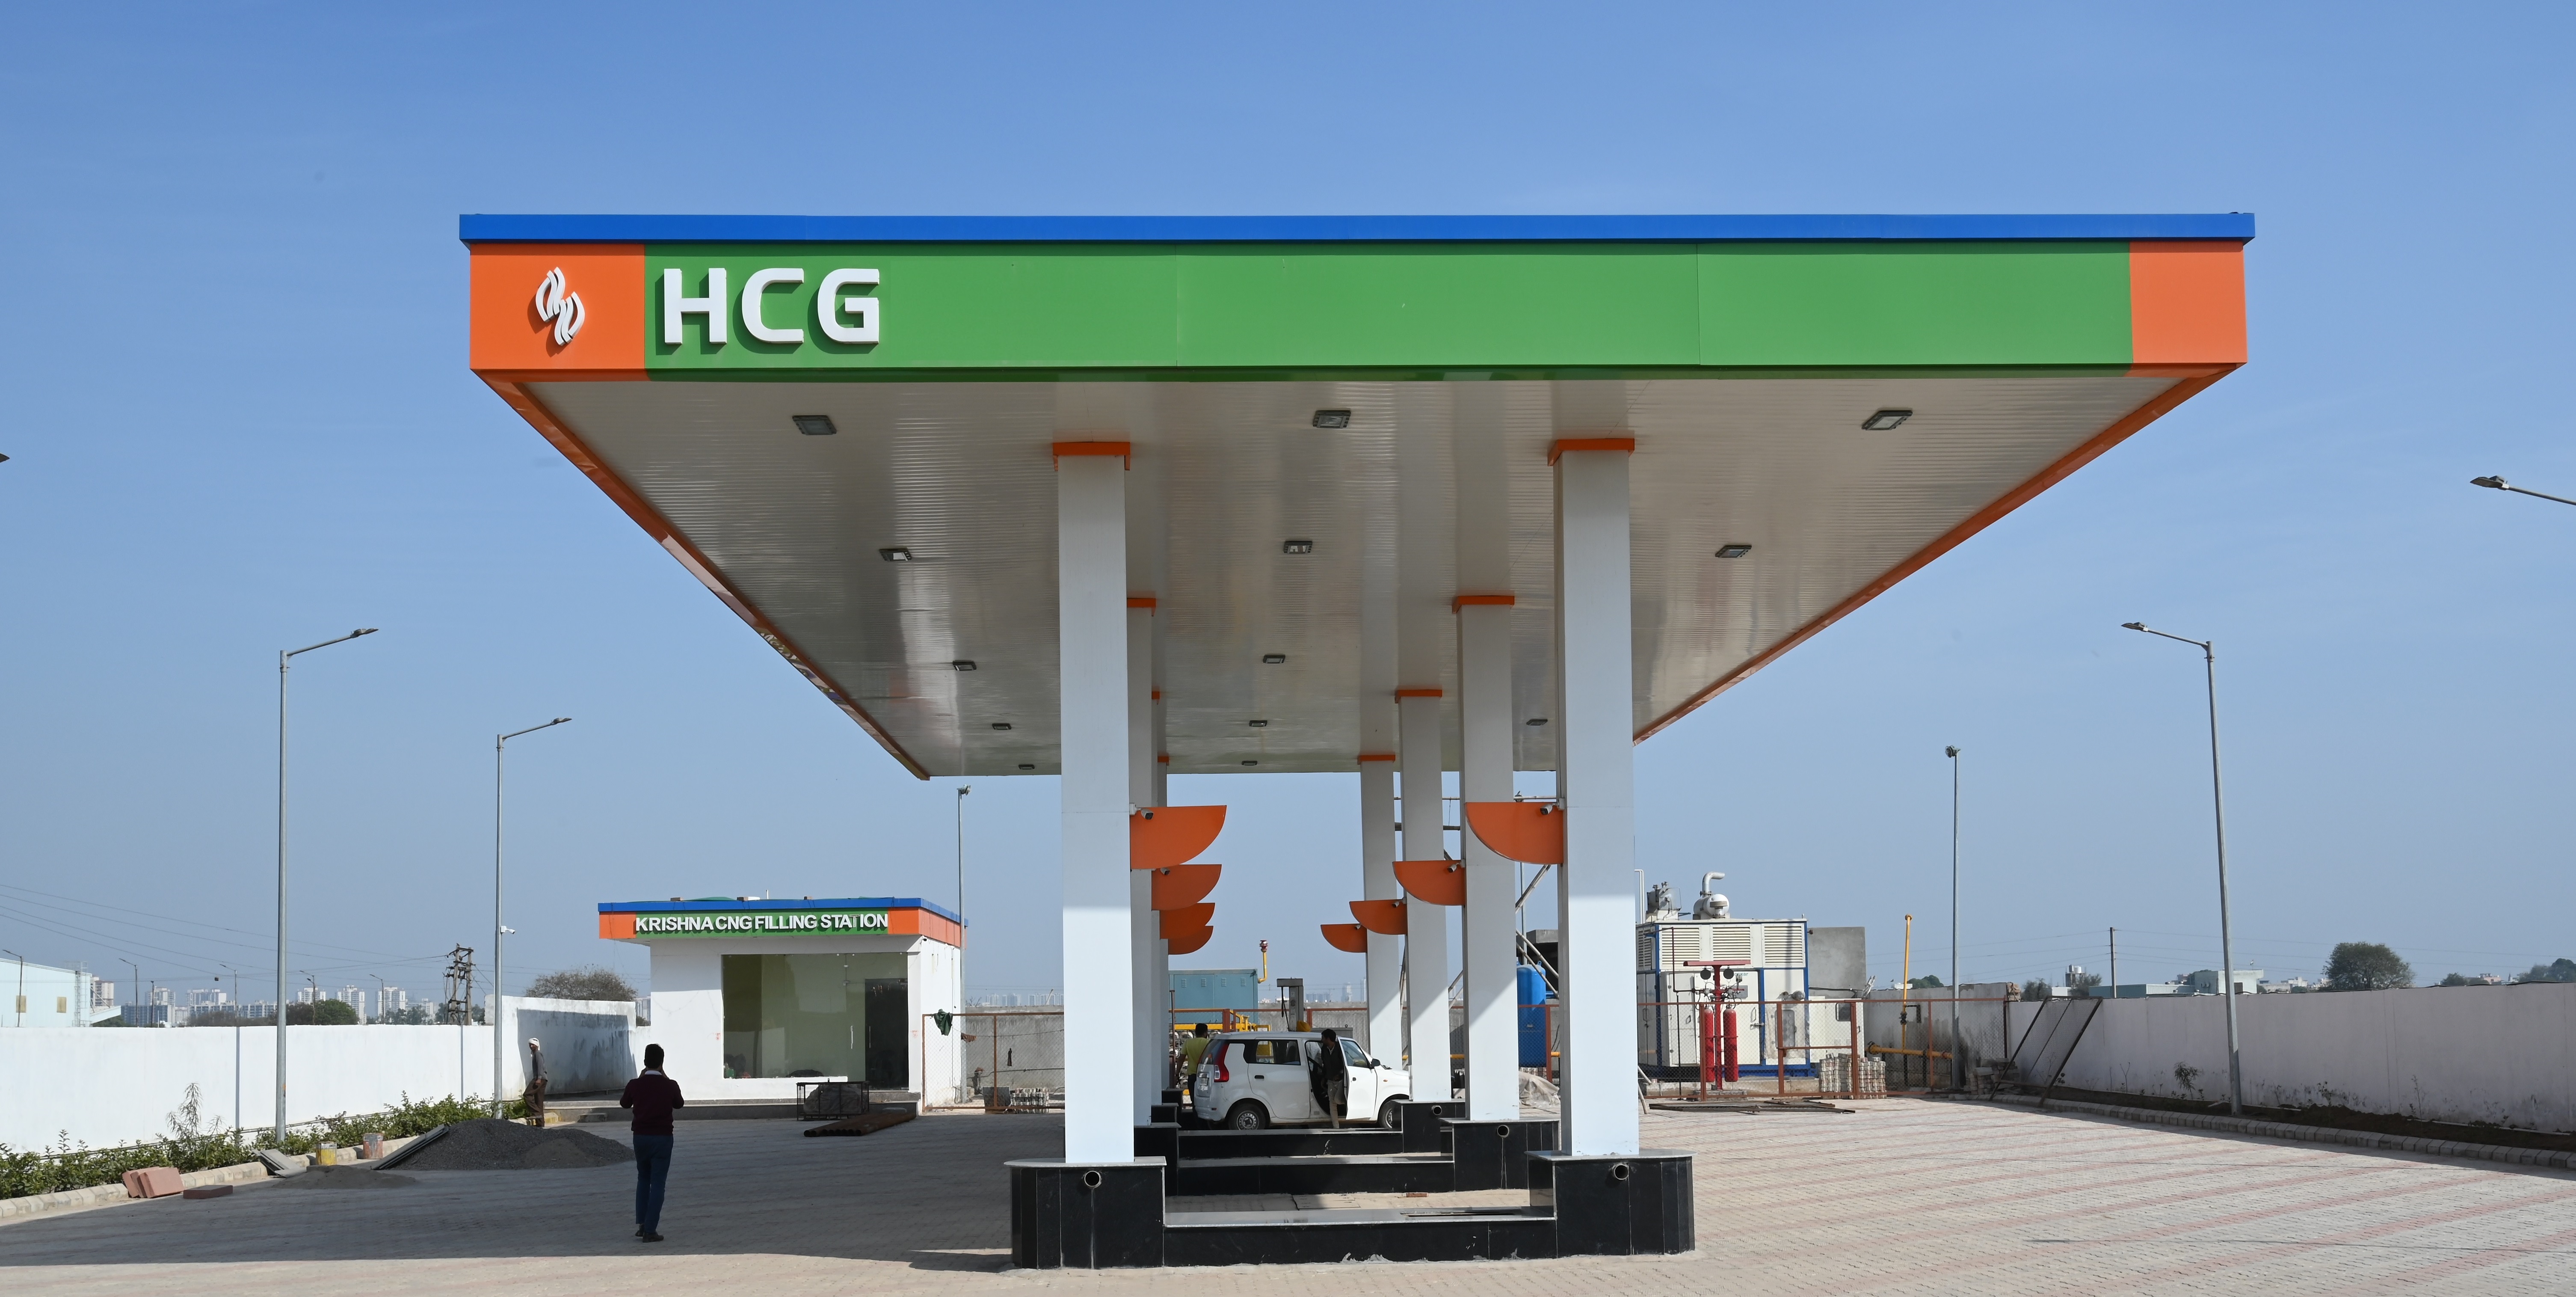 PNG and CNG network expansion,hcg group, png, narendra modi, piped natural gas, kapil chopra, petroleum and natural gas regulatory board, compressed natural gas